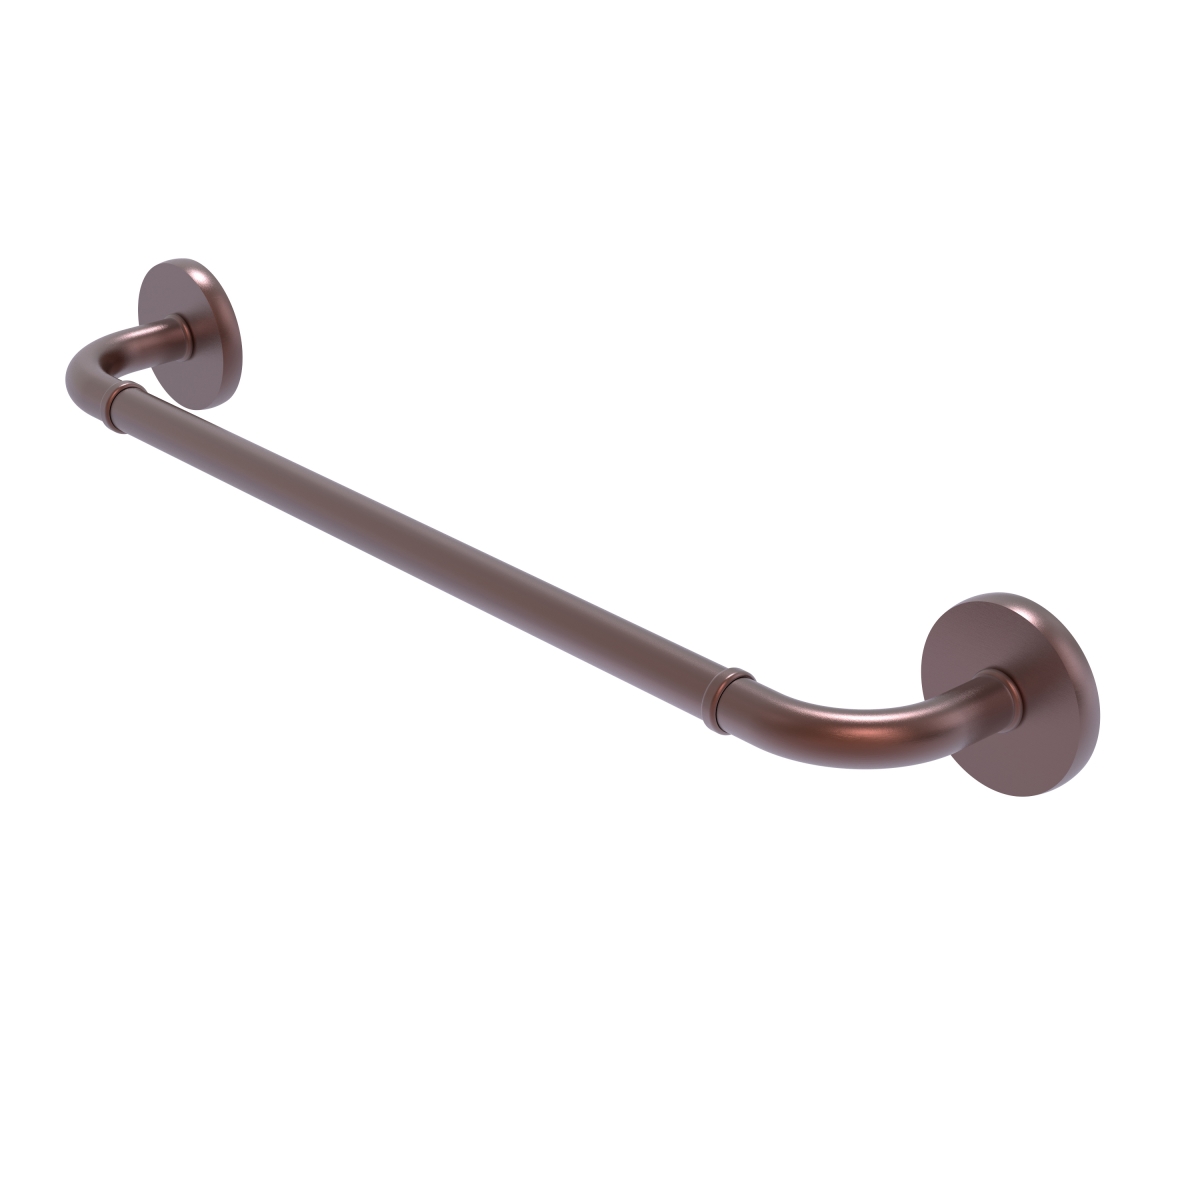 Allied Brass RM-41-18-CA 18 in. Remi Collection Towel Bar, Antique Copper